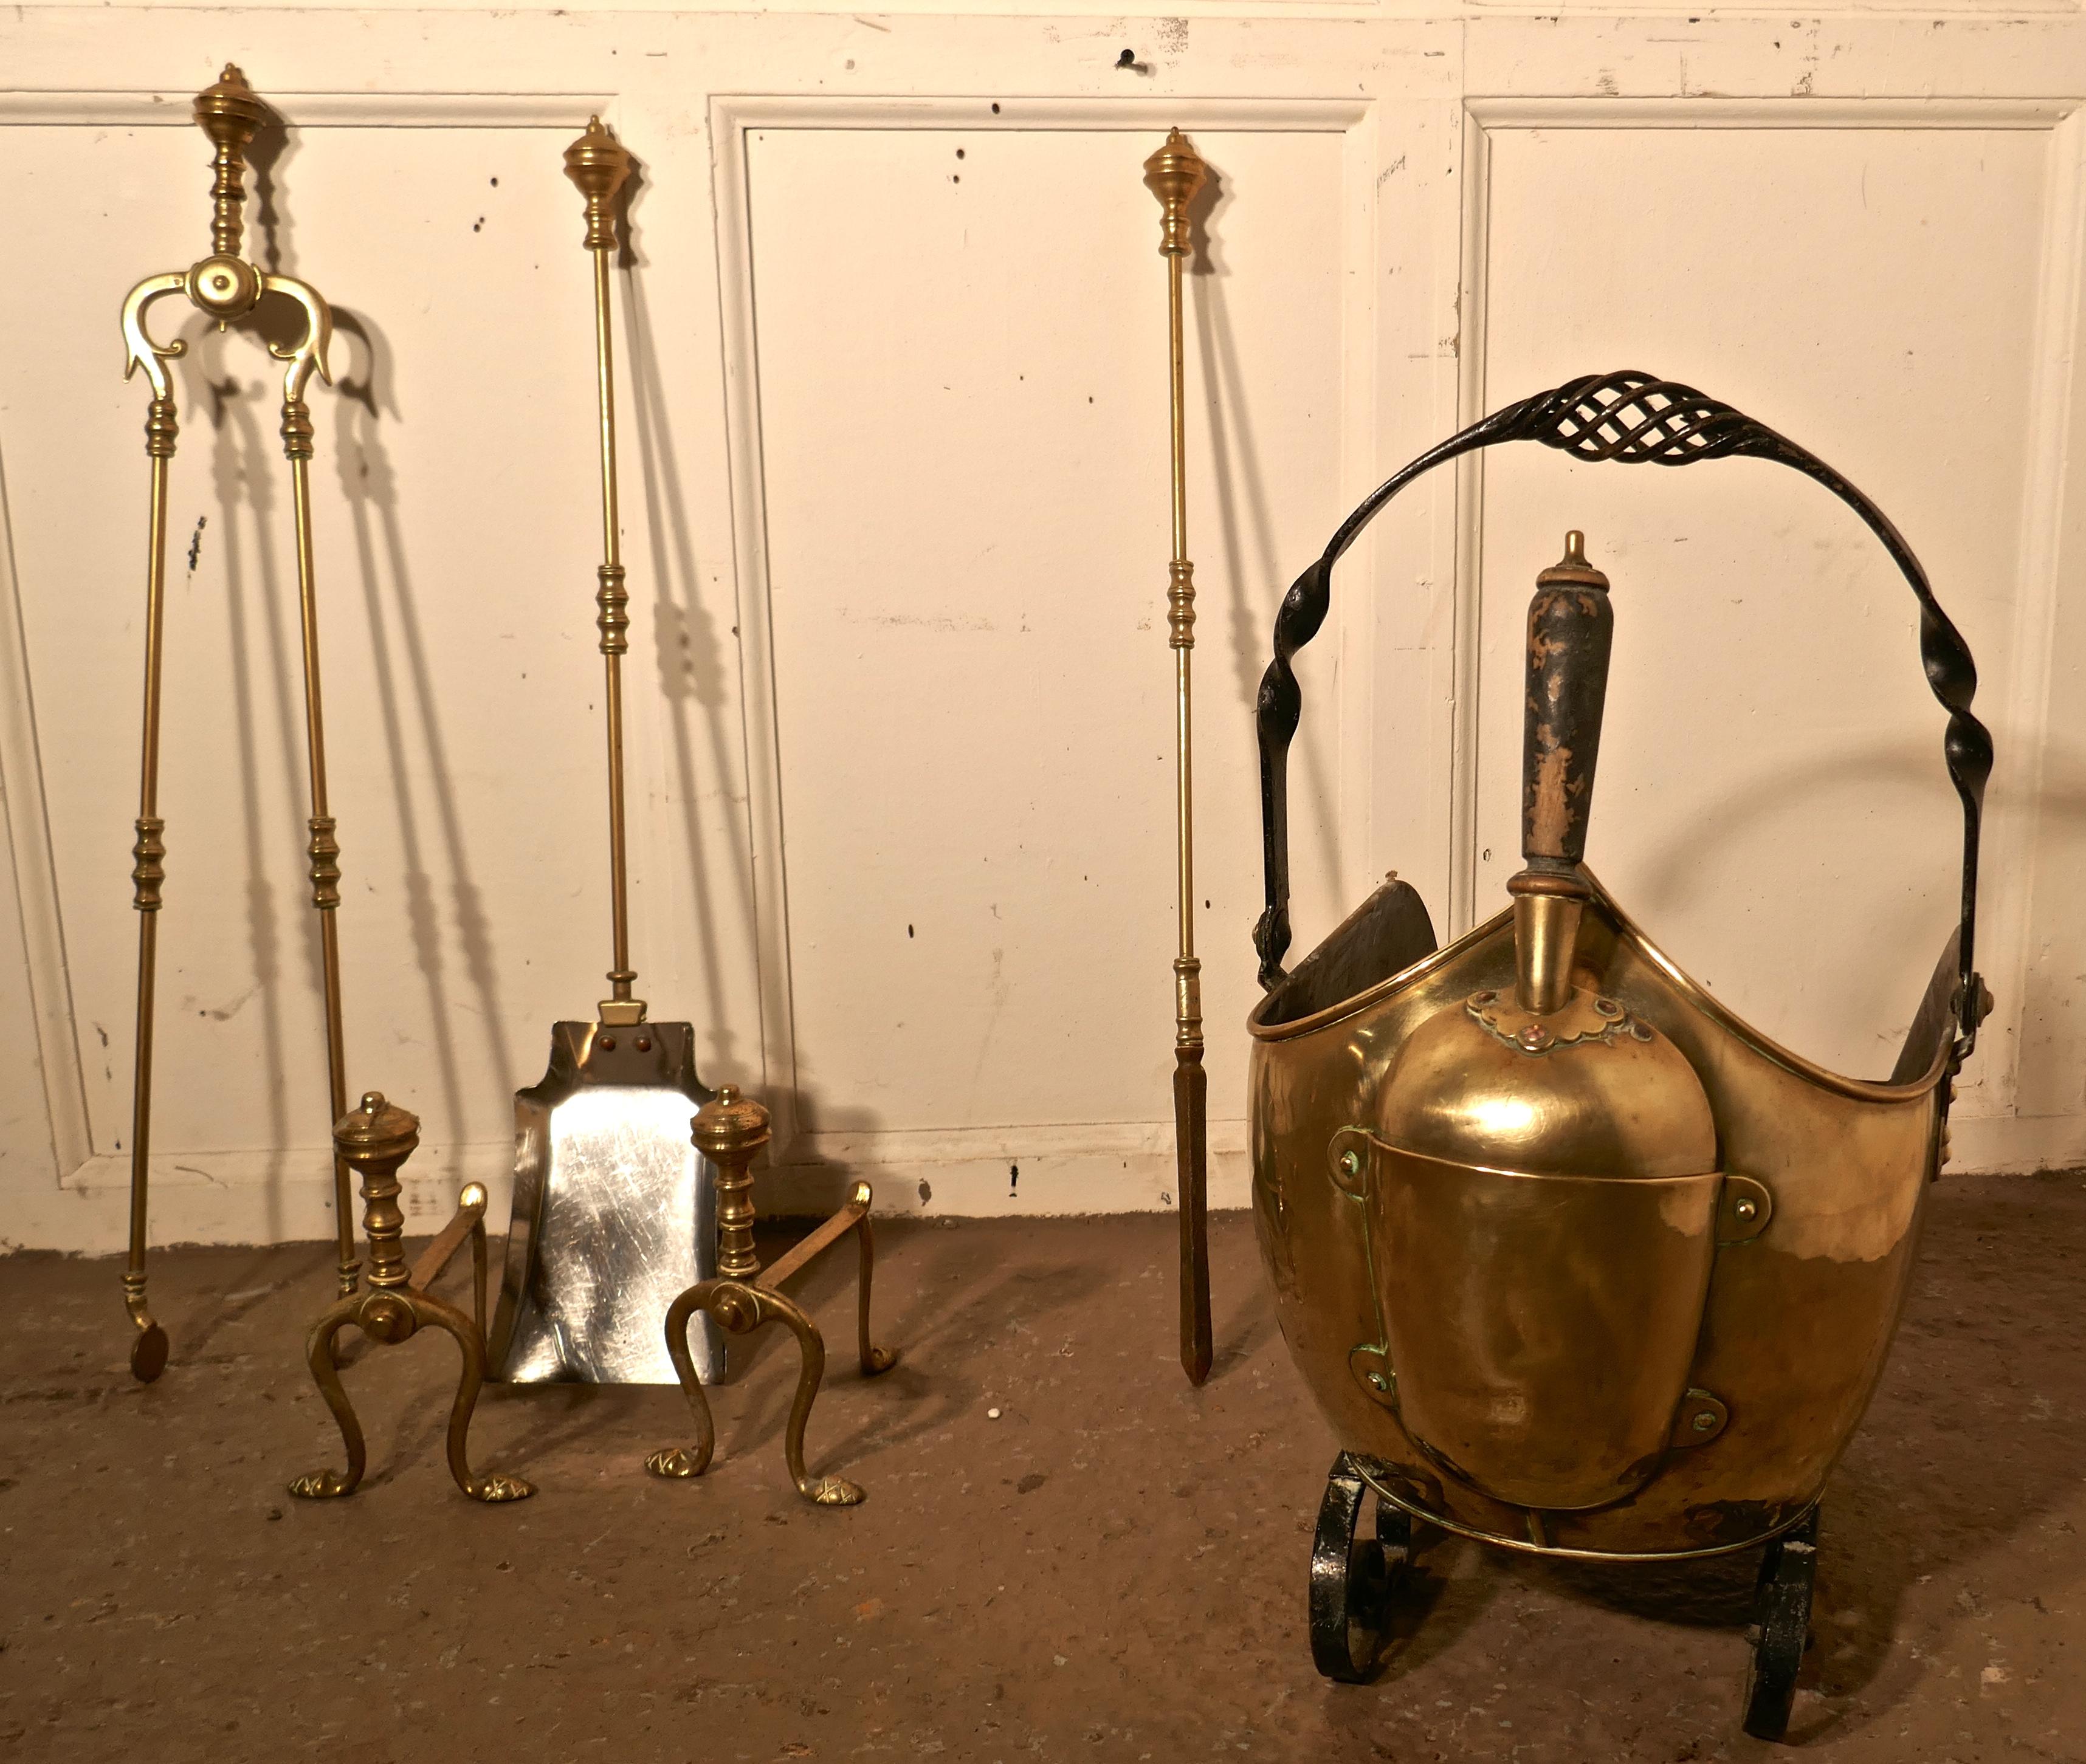 Arts and crafts brass helmet coal scuttle and companion set

This is a long fireside companion set, tongs, shovel and poker complete with andiron rests and a helmet coal scuttle with integral shovel

The Scuttle is a top quality piece with an